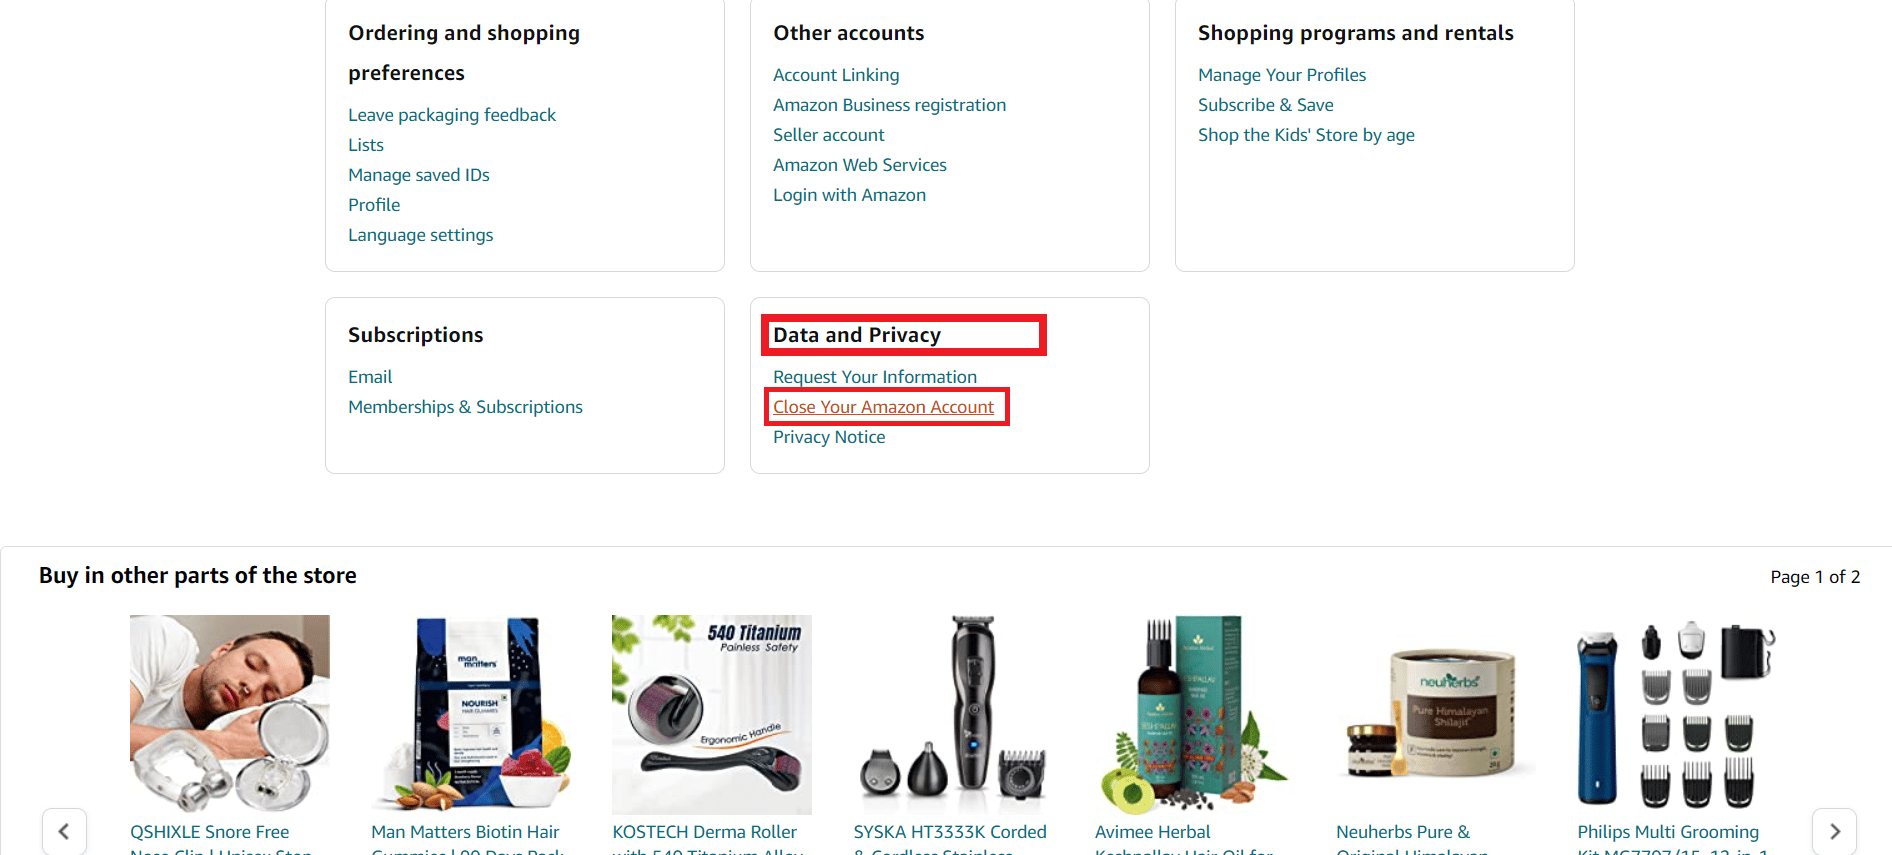 Then go to the Data and Privacy section and select Close Your Amazon Account.